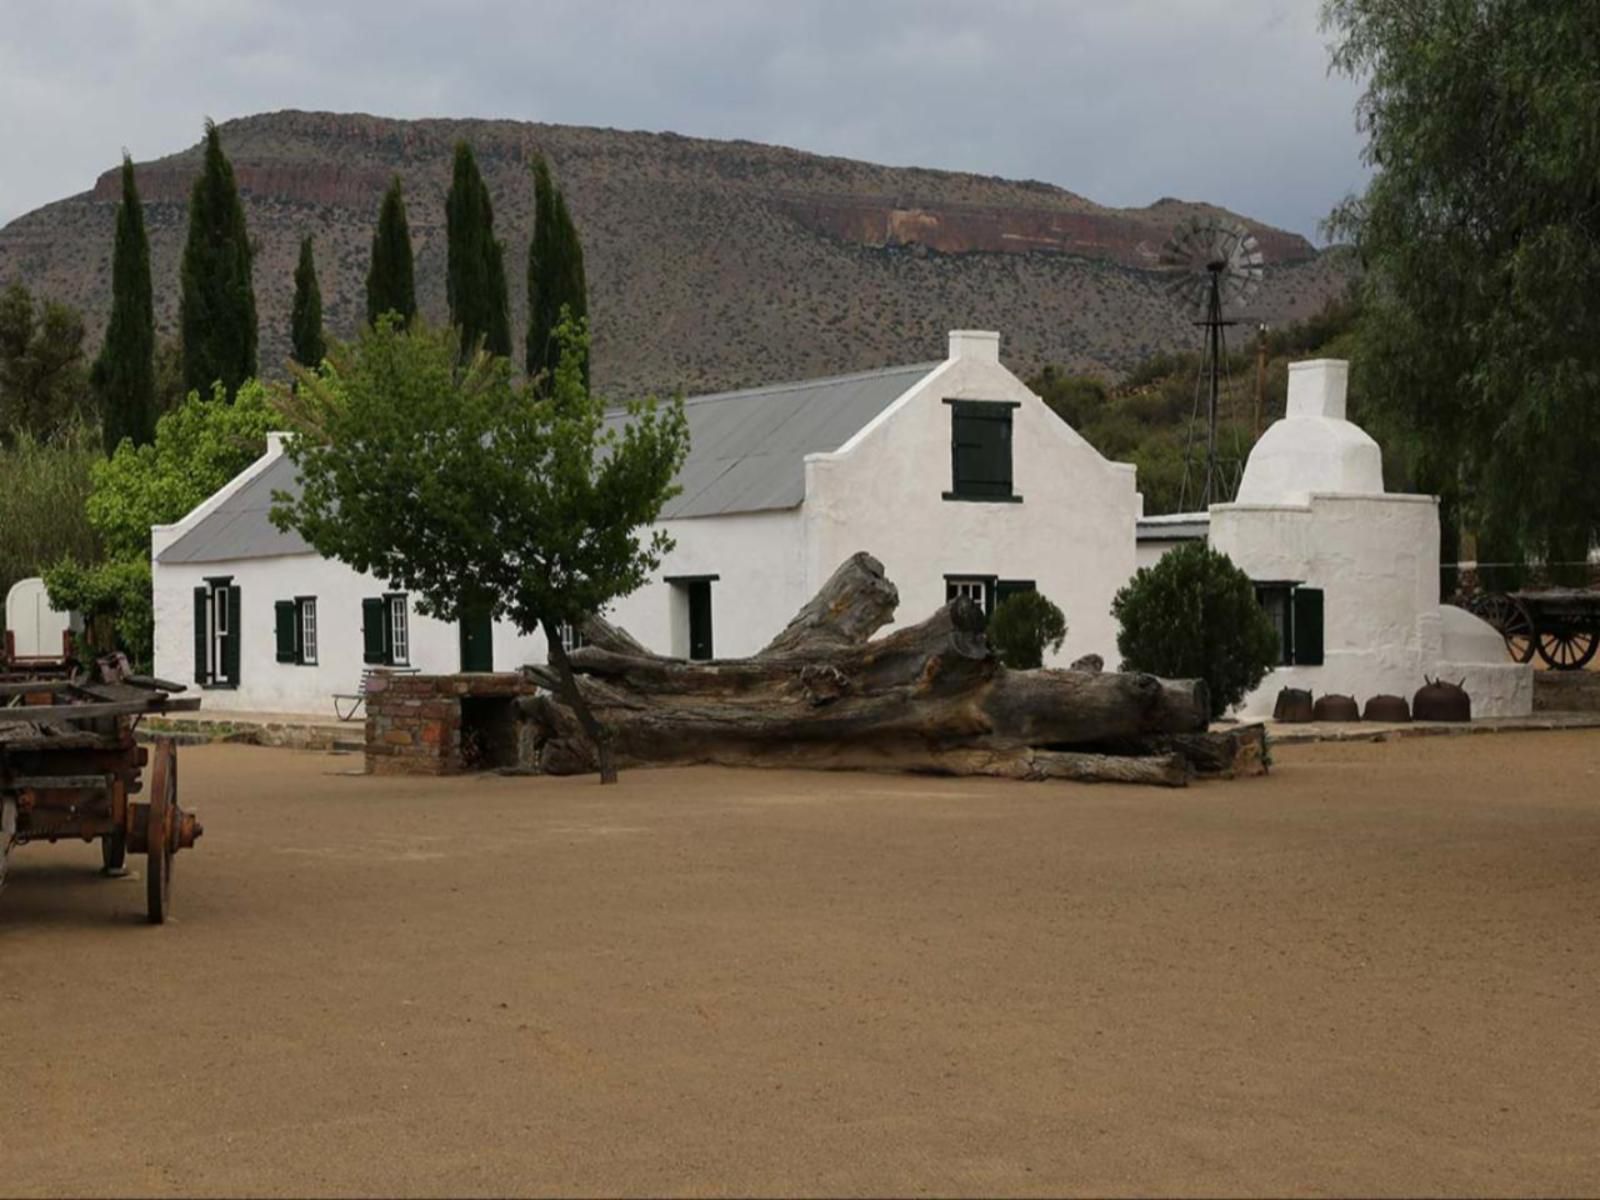 Letskraal Farm Accommodation Graaff Reinet Eastern Cape South Africa Building, Architecture, Desert, Nature, Sand